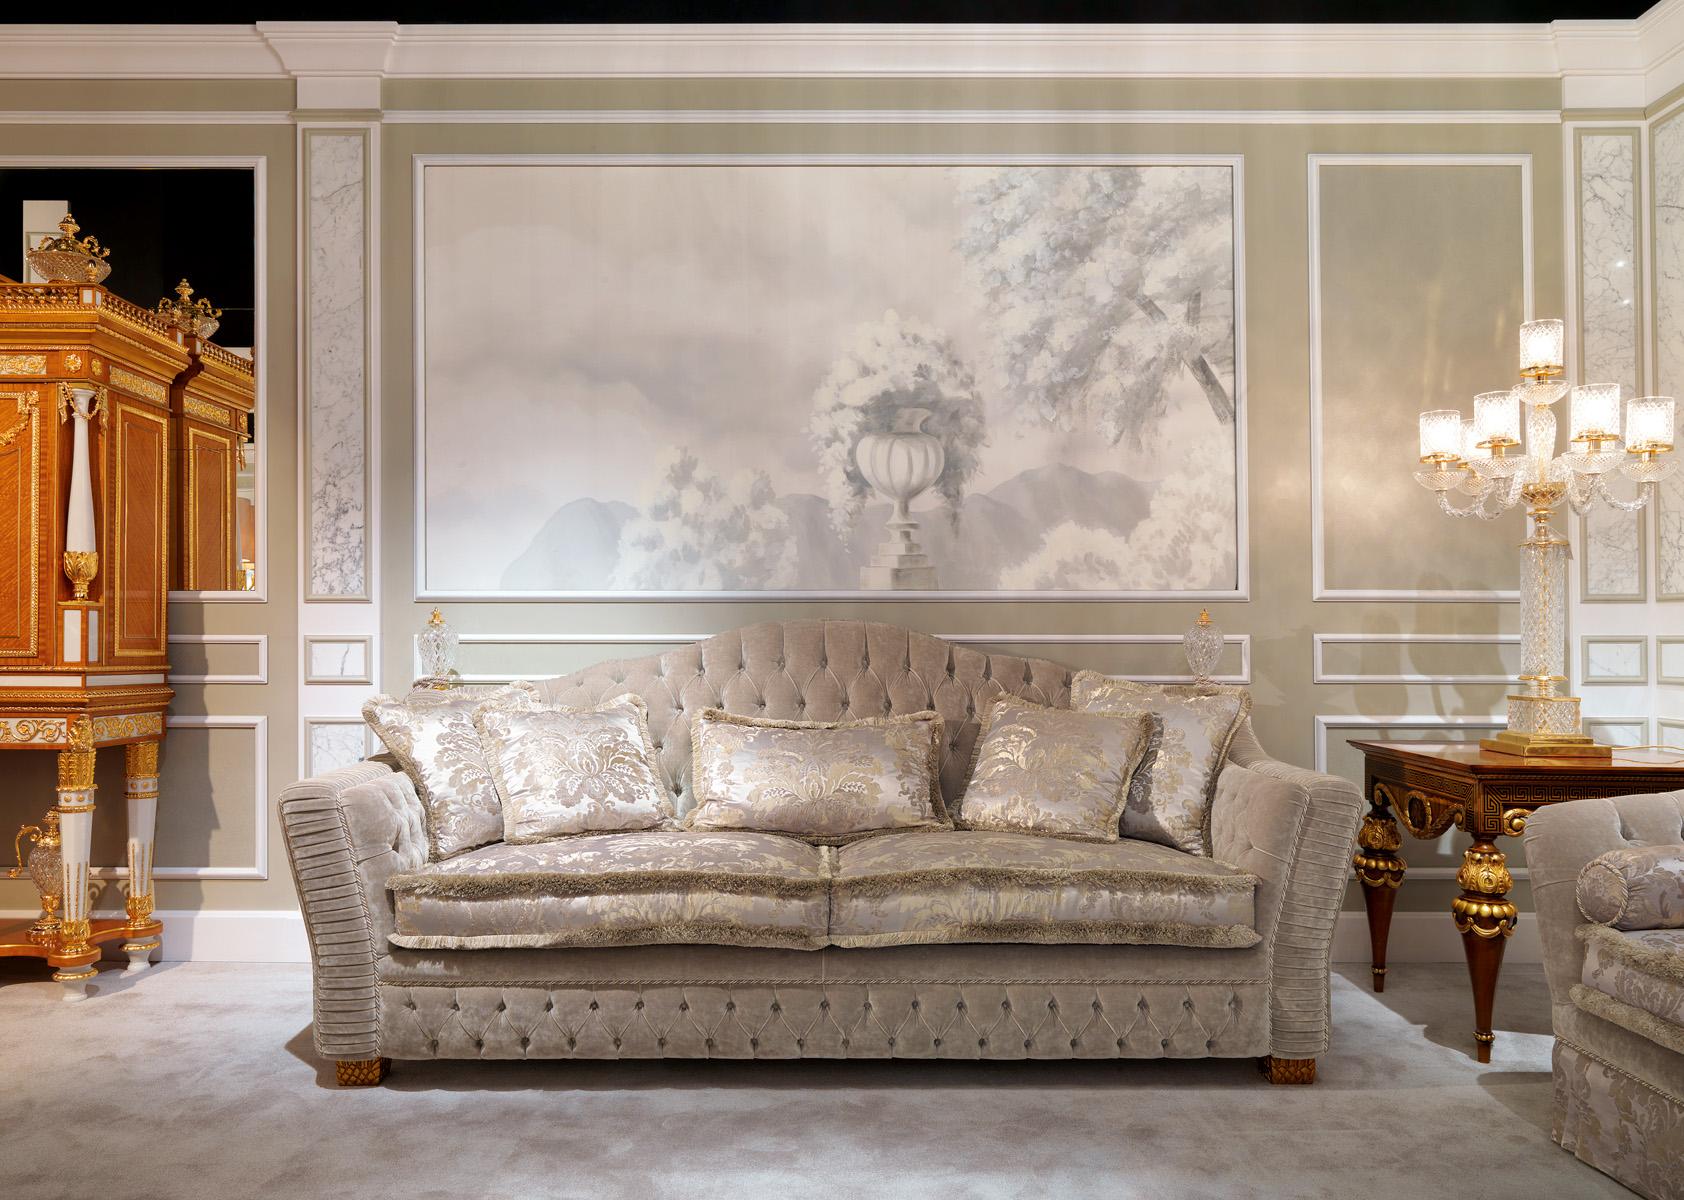 The Borromeo three-seat sofa, which has become one of the iconic models distinguishing the Zanaboni brand, is presented here in the grey version, fully upholstered in velvet with handcrafted button tufting and fabric pleating techniques, enhanced